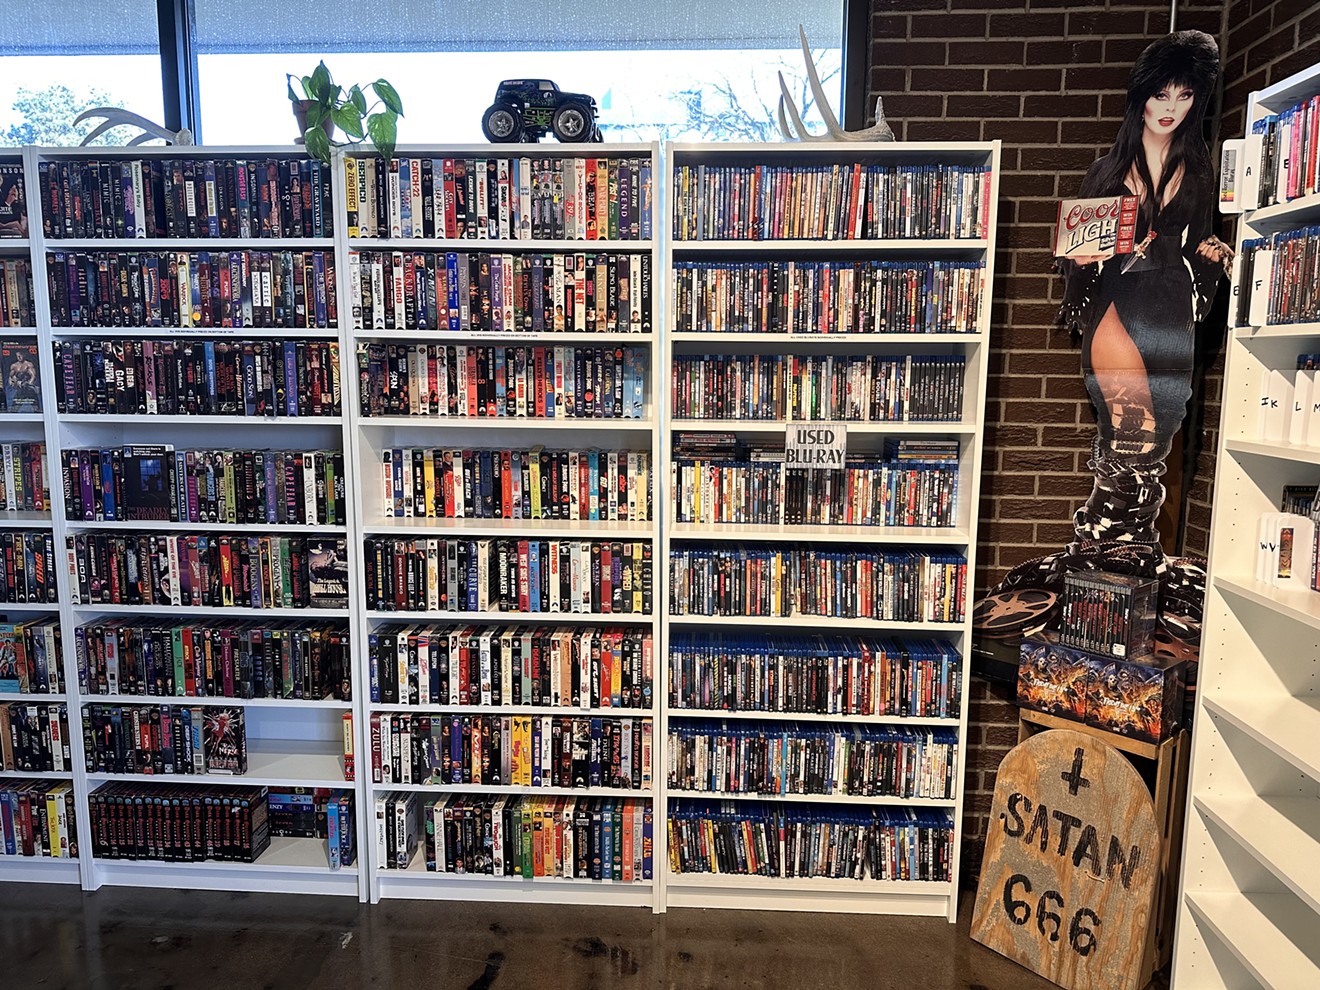 Elvira poses with VHS tapes at the Archive video store.